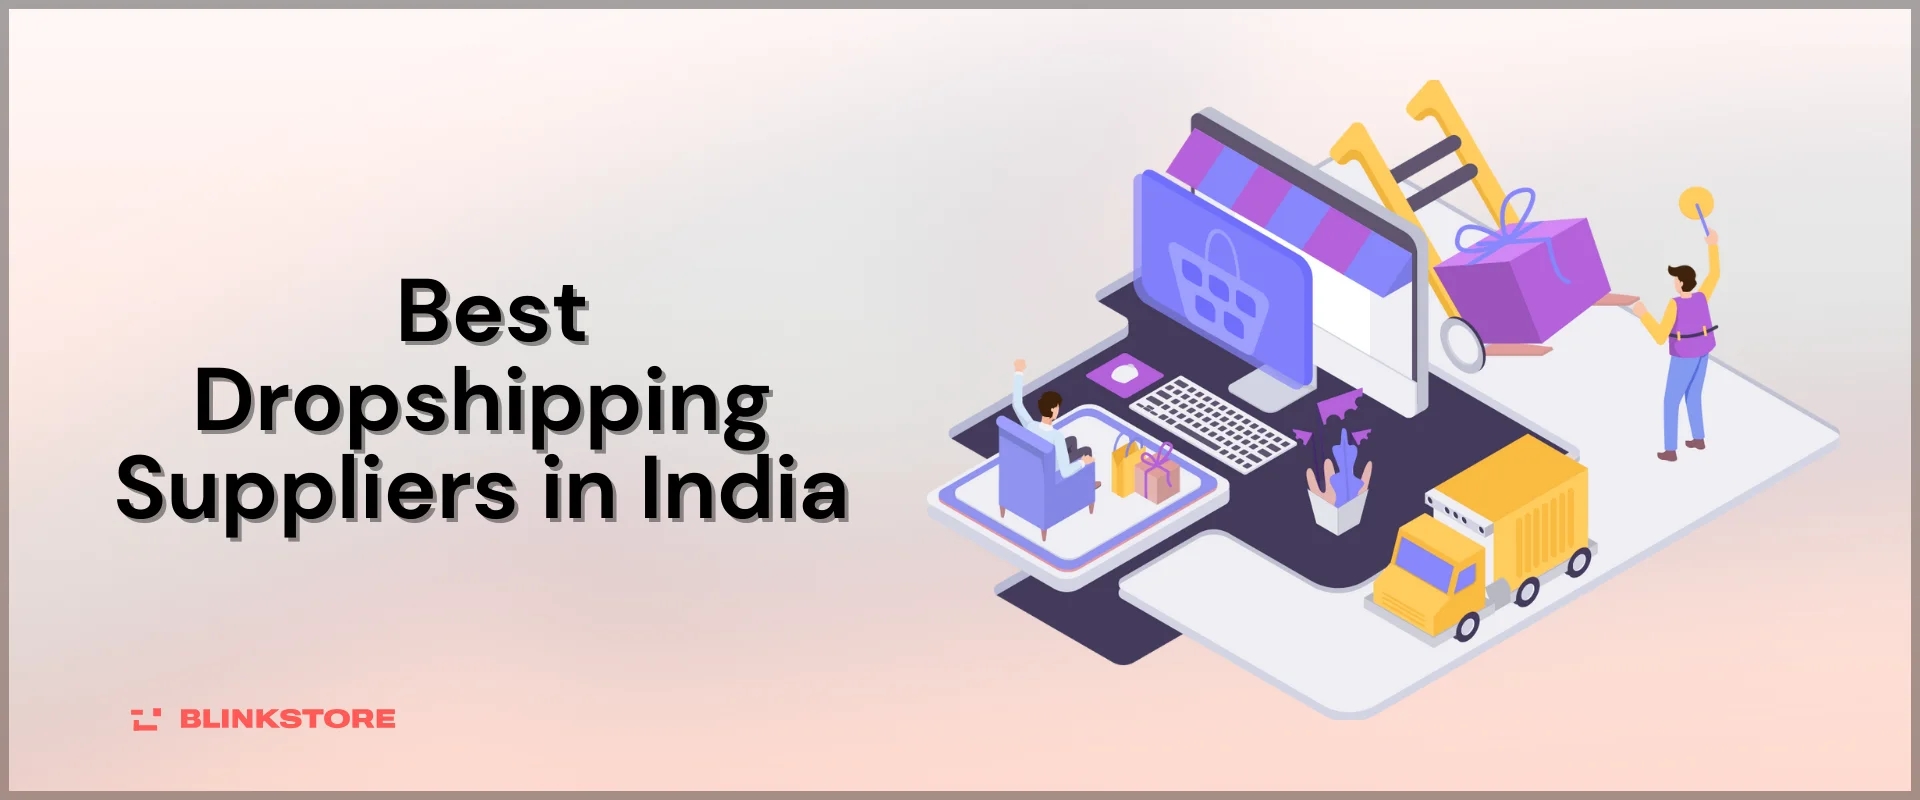 Best Dropshipping Suppliers in India